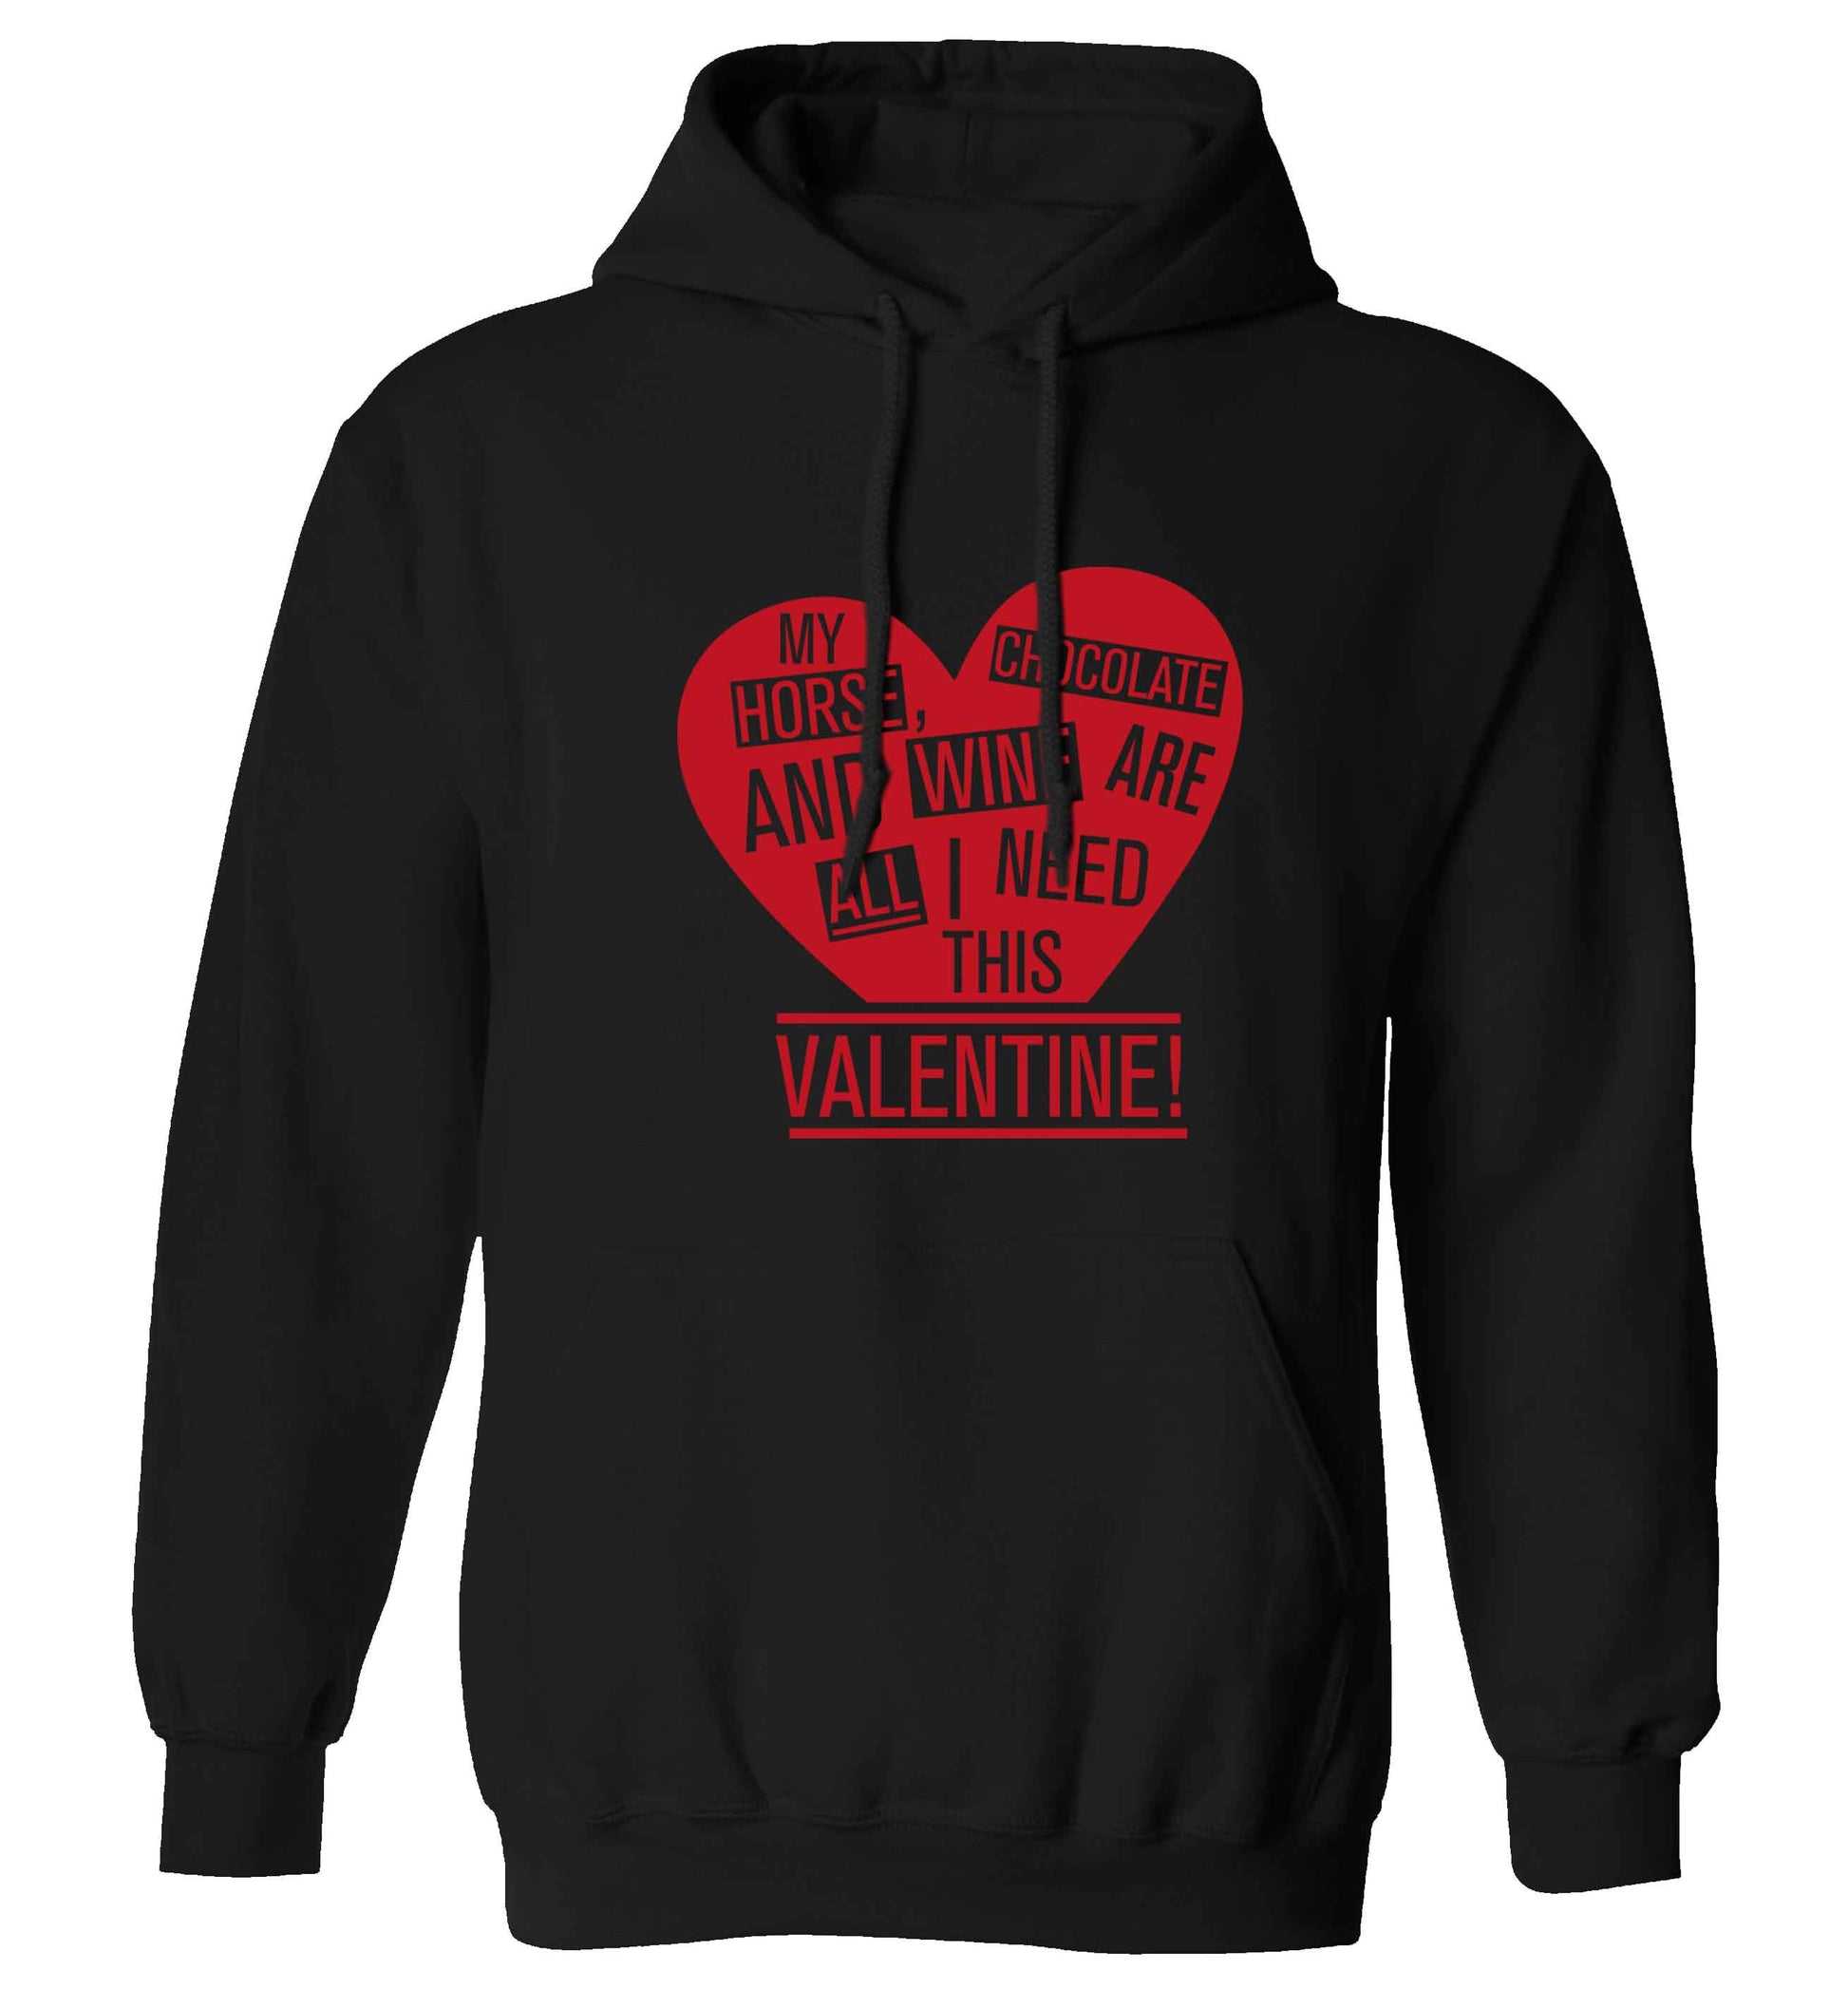 My horse chocolate and wine are all I need this valentine adults unisex black hoodie 2XL